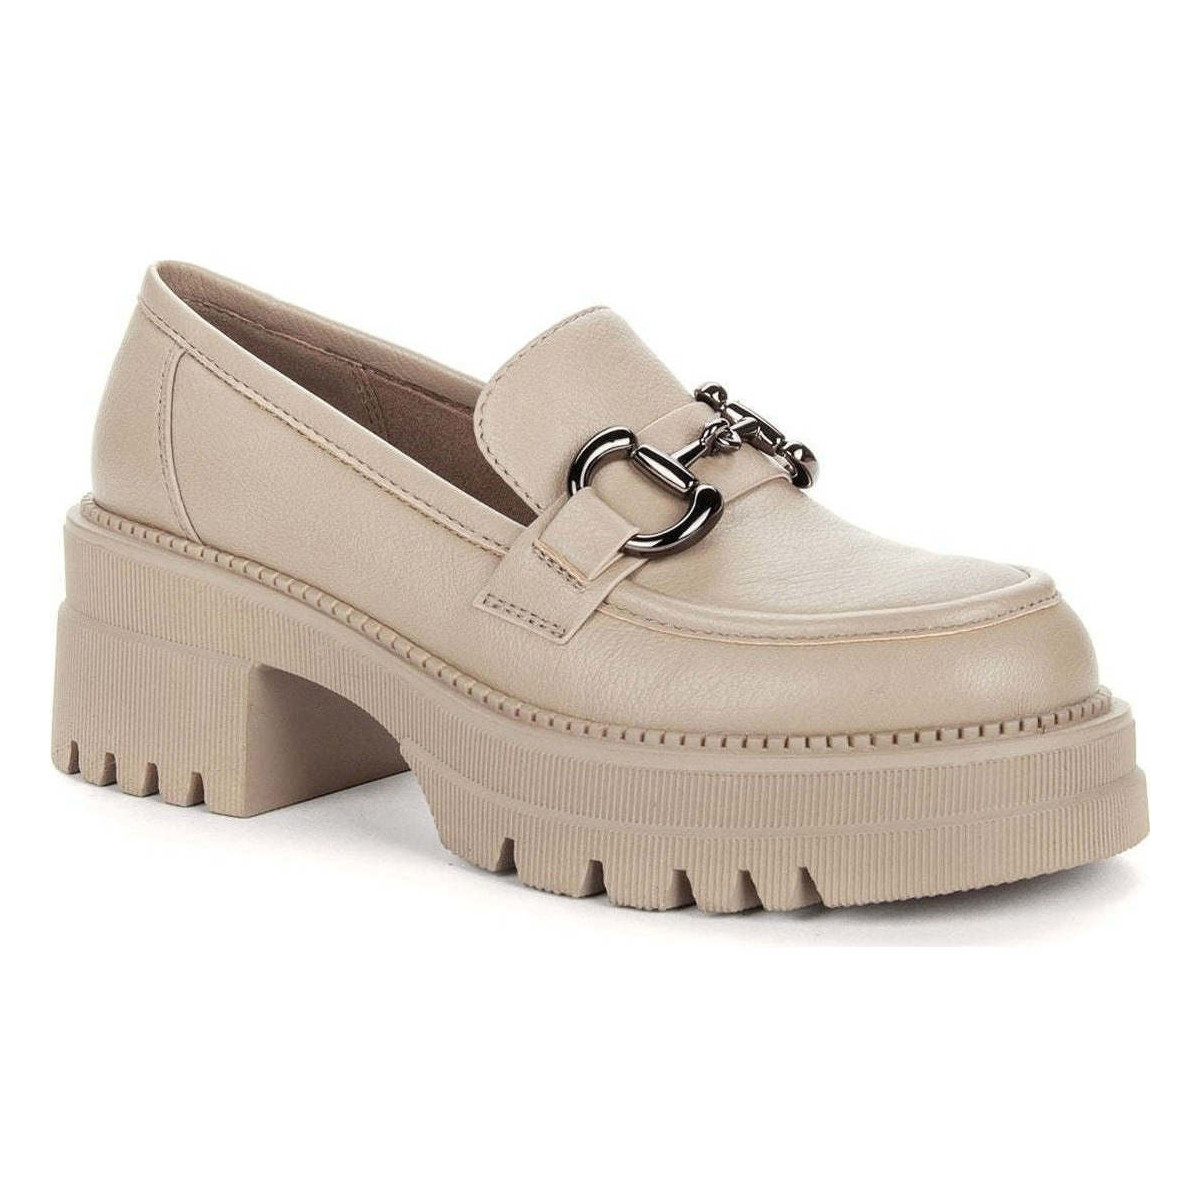 Chaussures Femme Mocassins Betsy beige casual closed loafers Beige